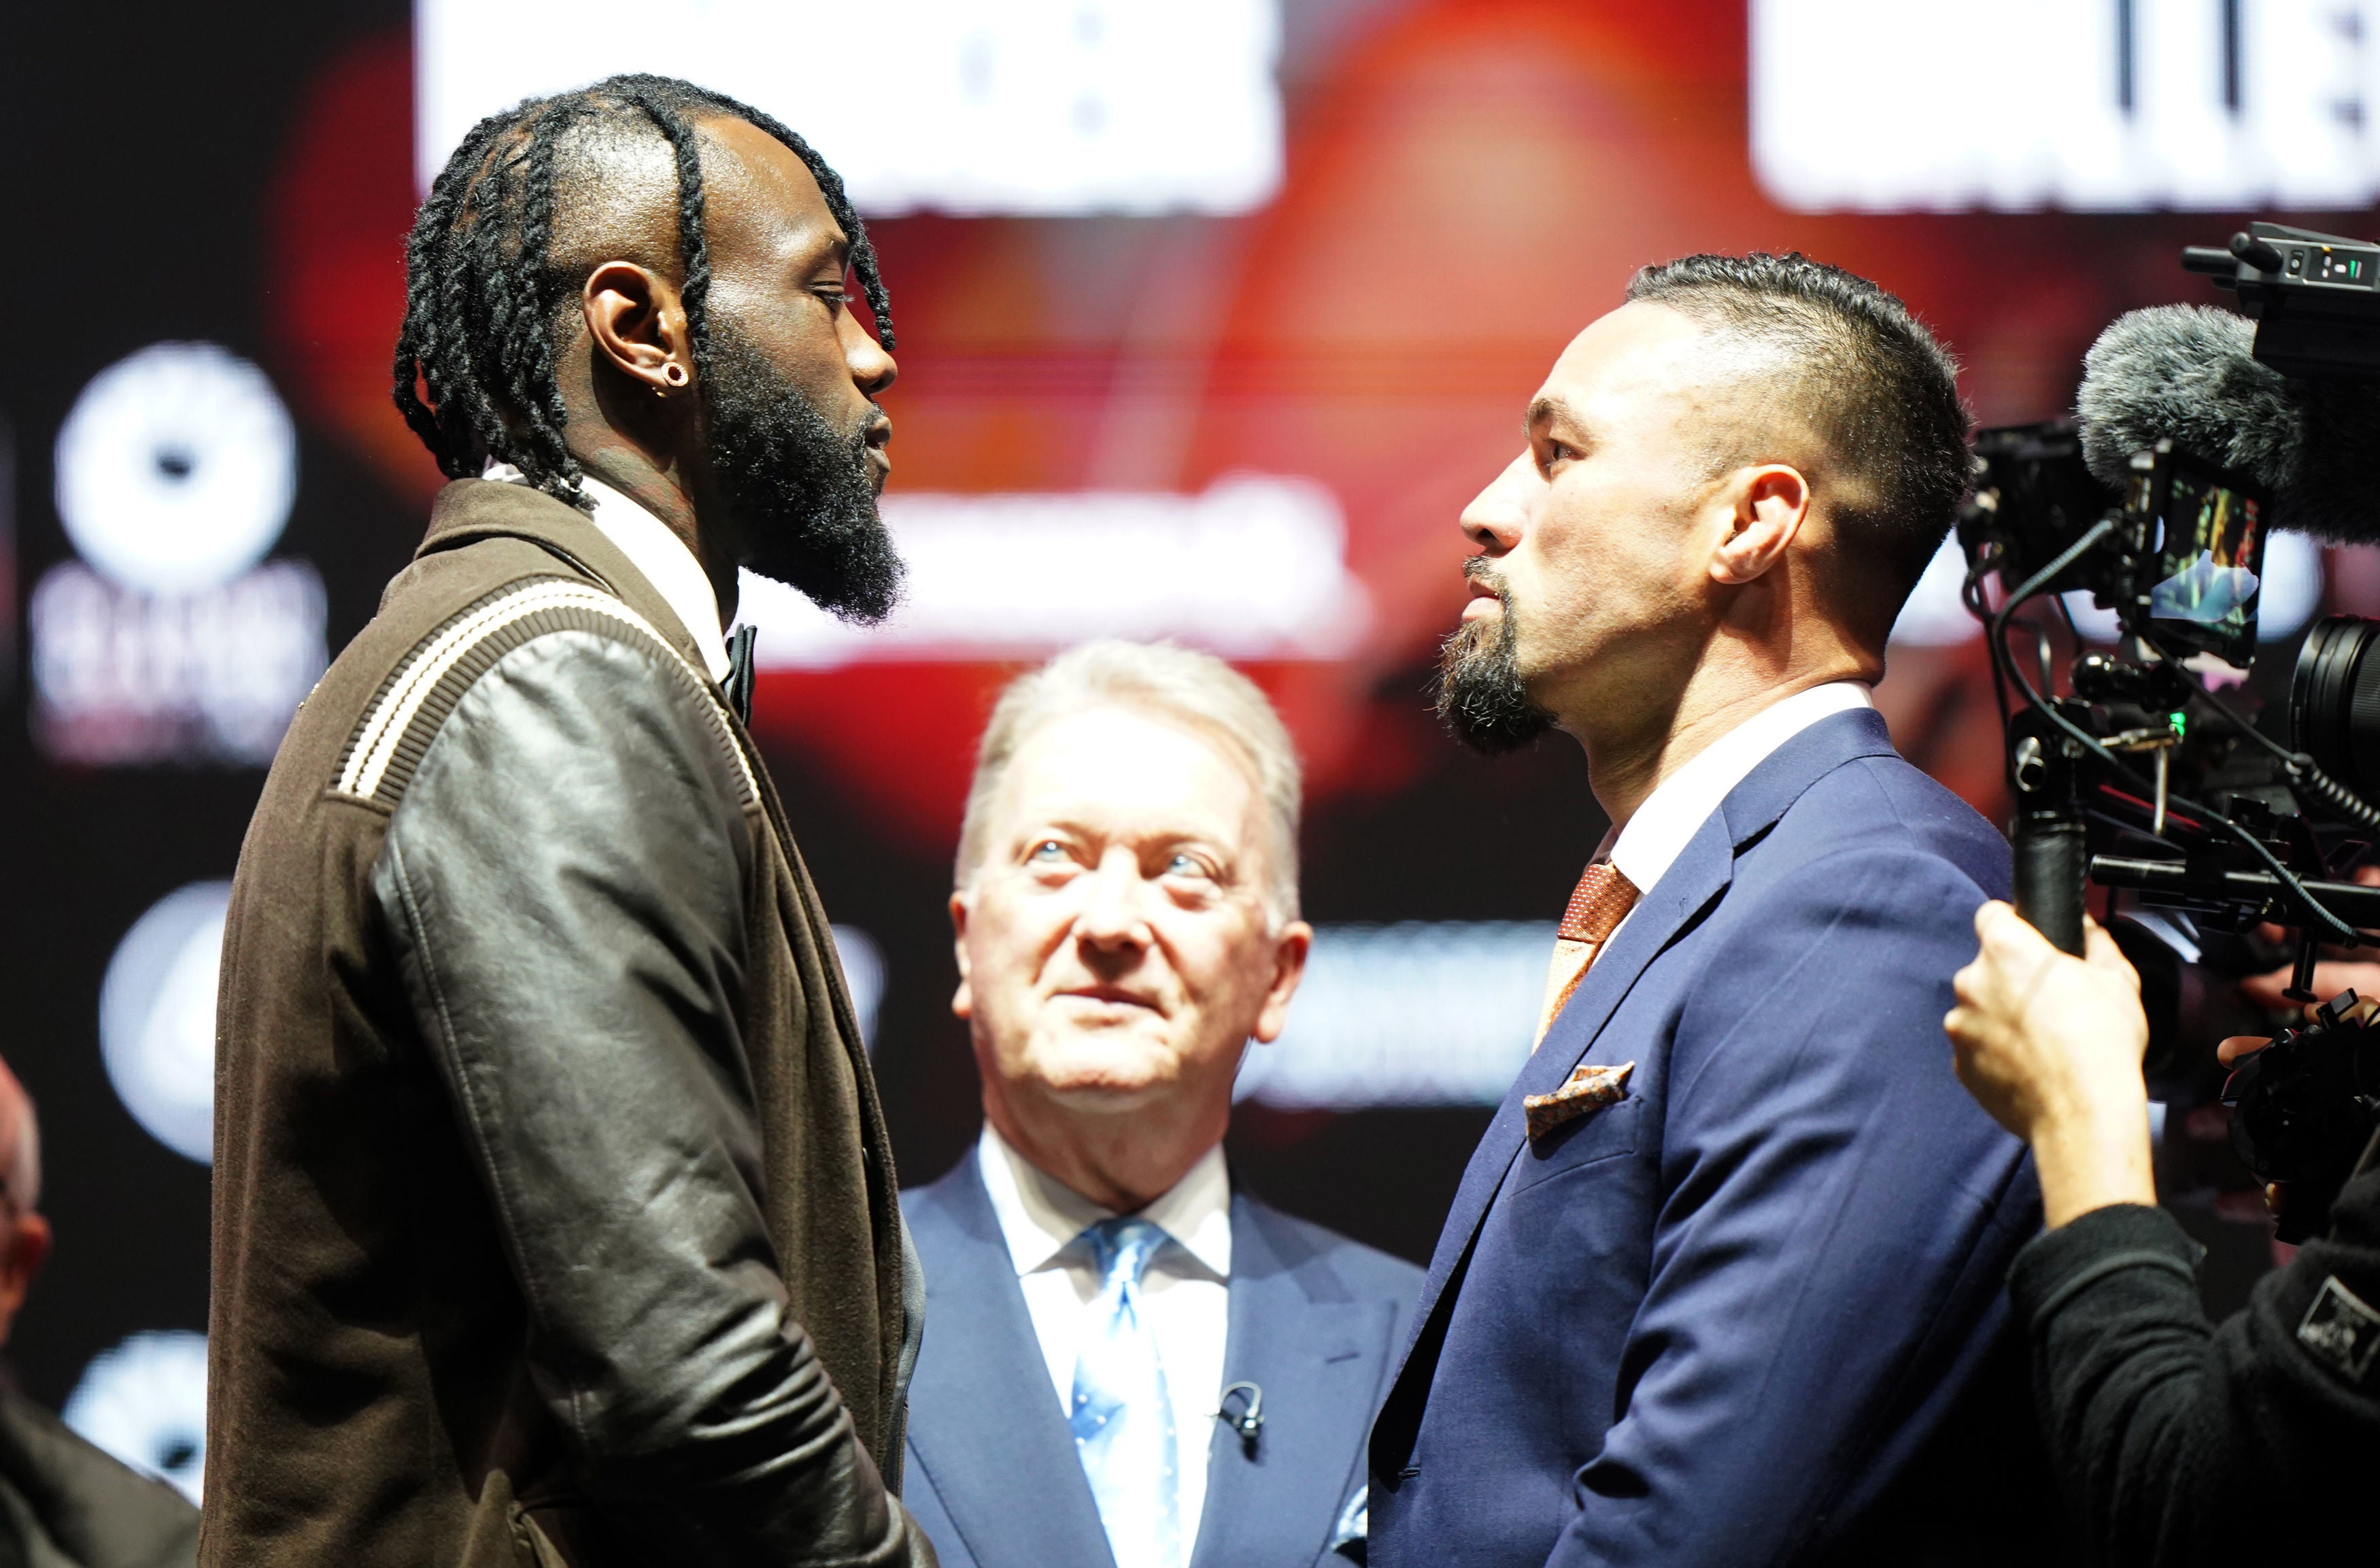 Wilder and Joseph Parker, a former opponent of Joshua, face off at Wembley Arena